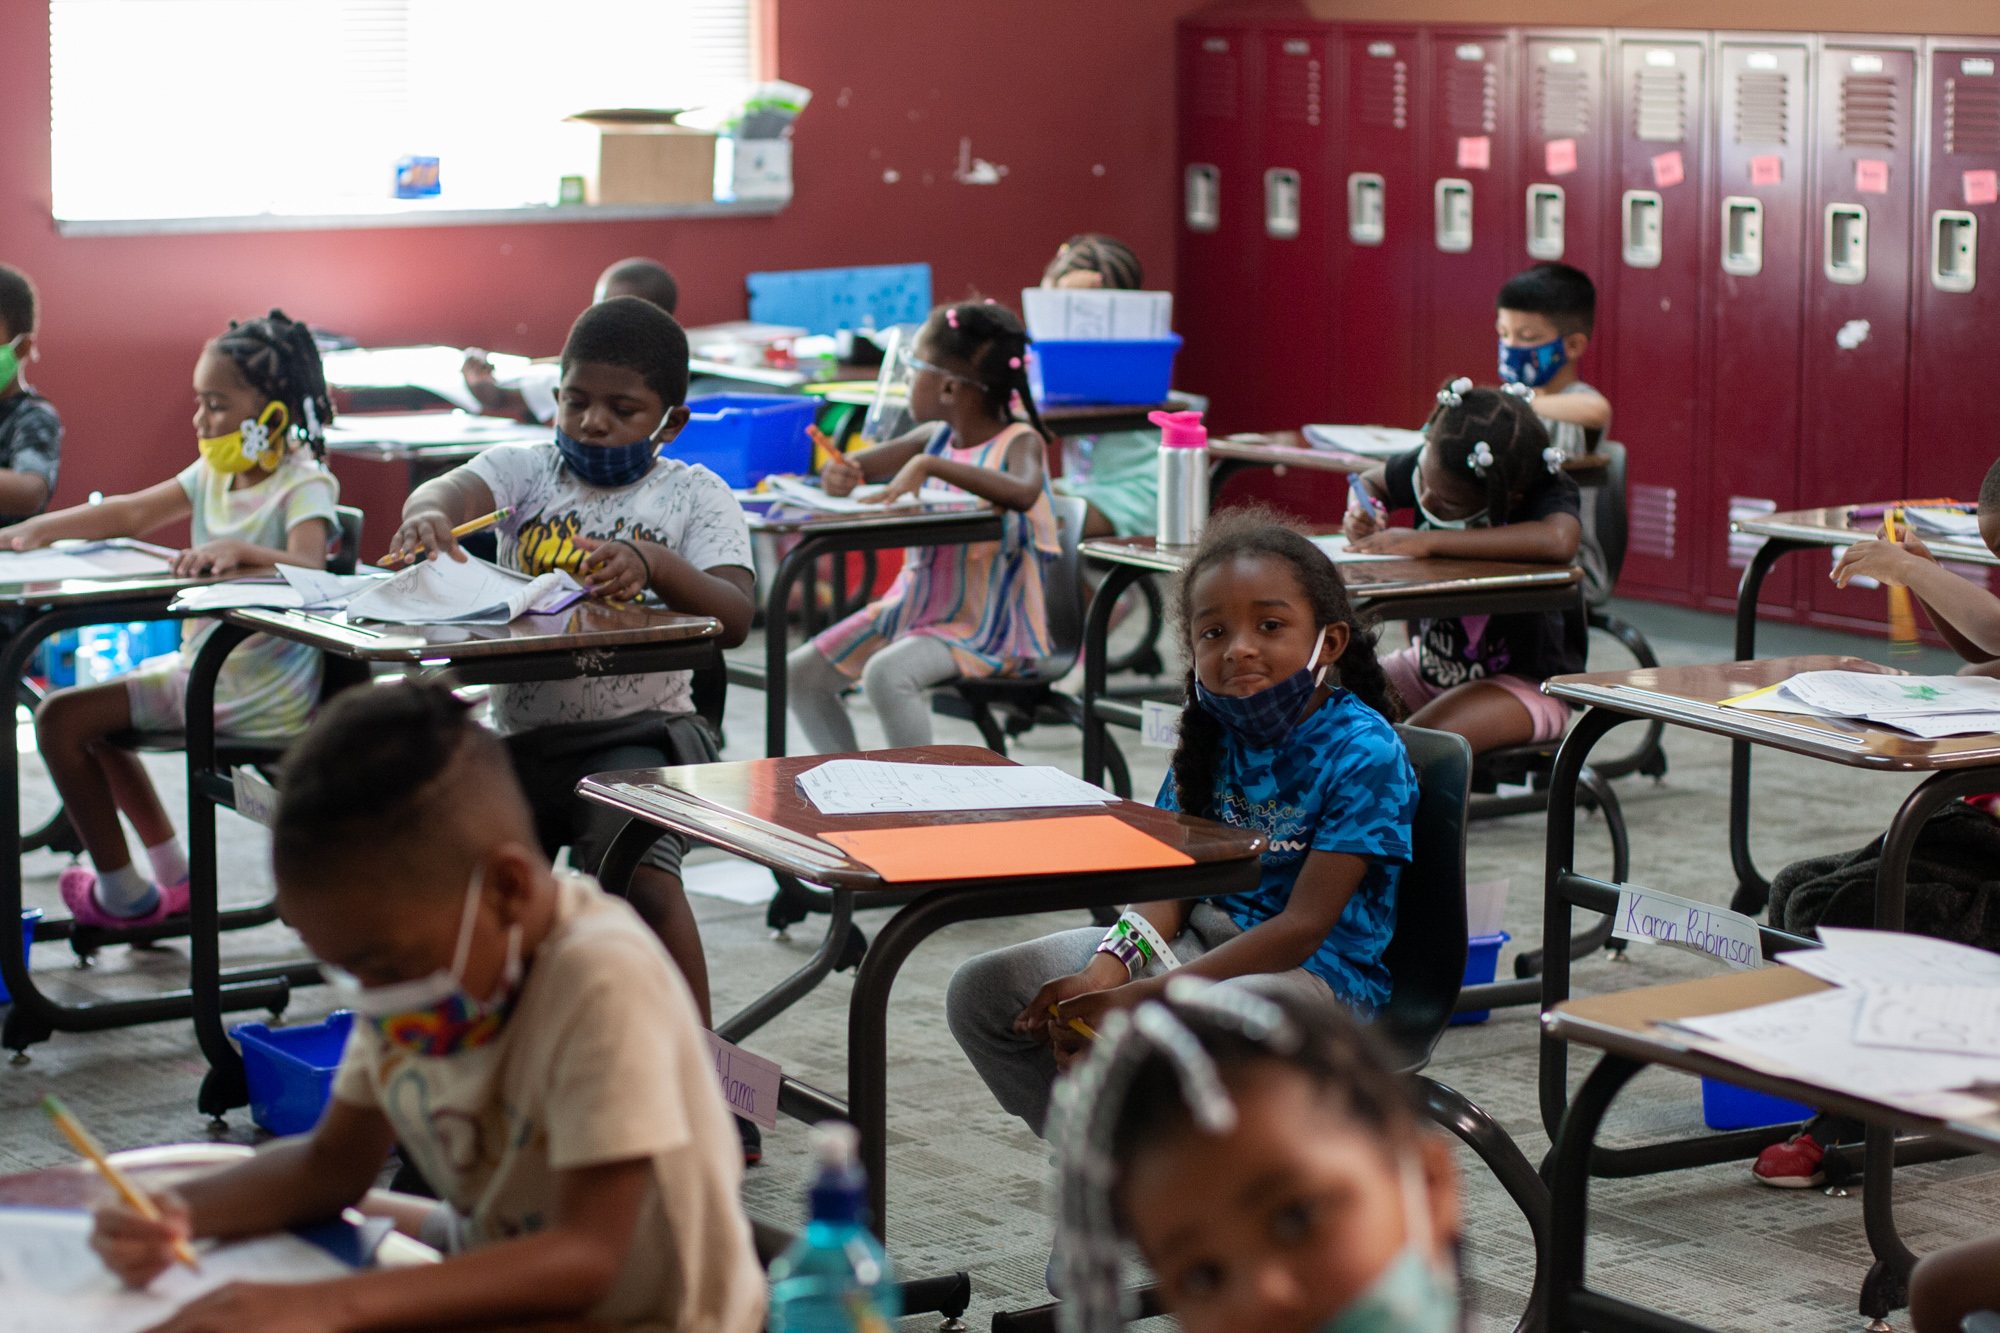 About 10 young kindergarten students sit at small desks looking at worksheets in a classroom lined with red lockers. One girl in a blue shirt and a black face mask in the middle of the photo looks at the camera.